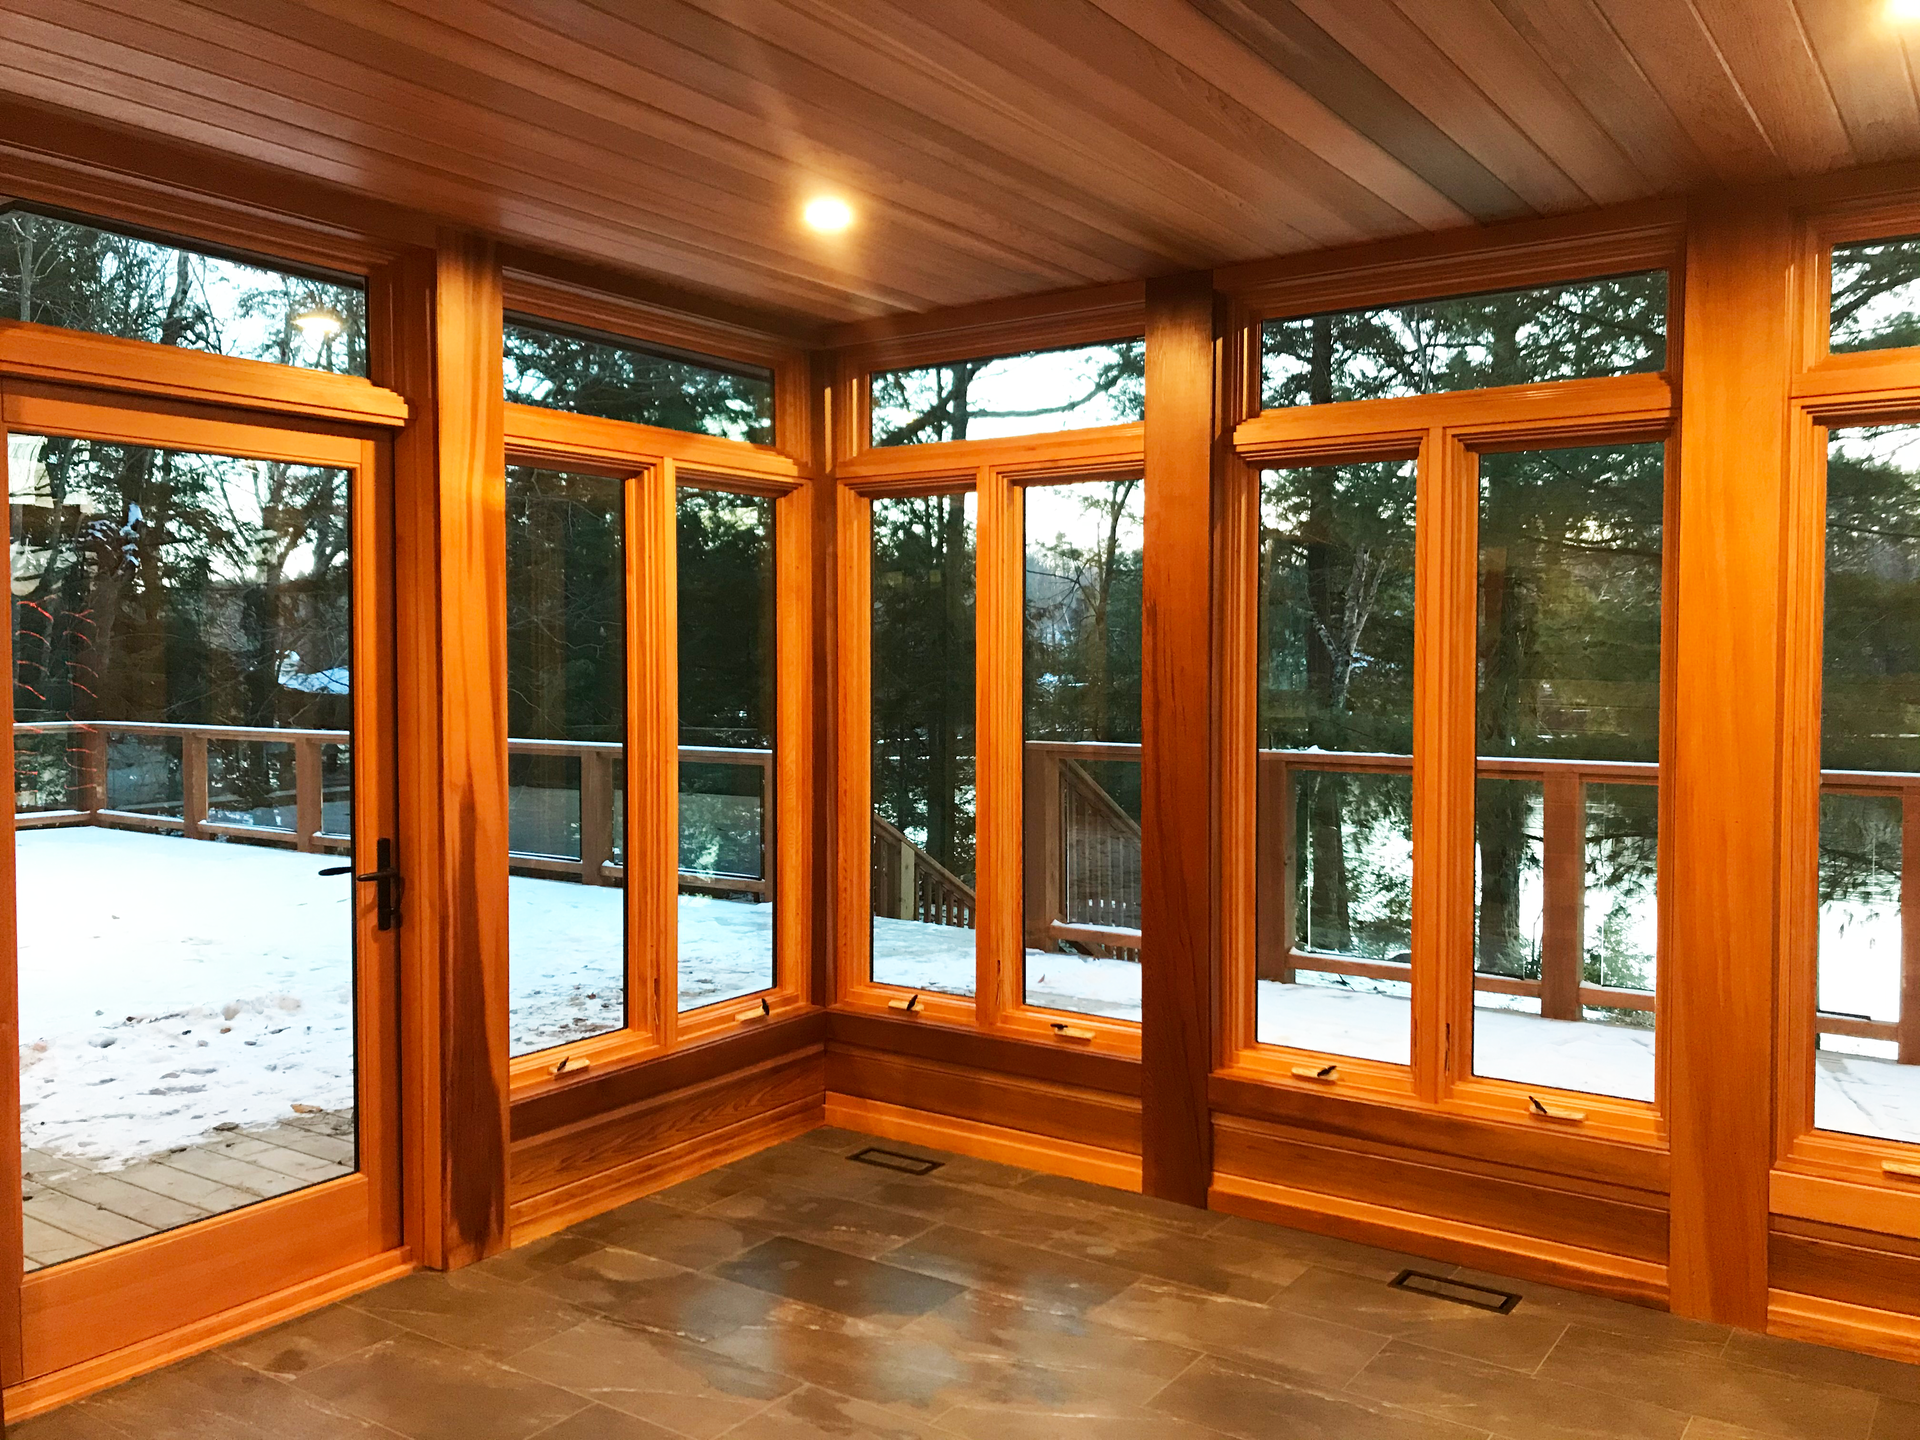 Inside the uncompleted Muskoka Room showing wood ceilings, floors and  window fixtures.